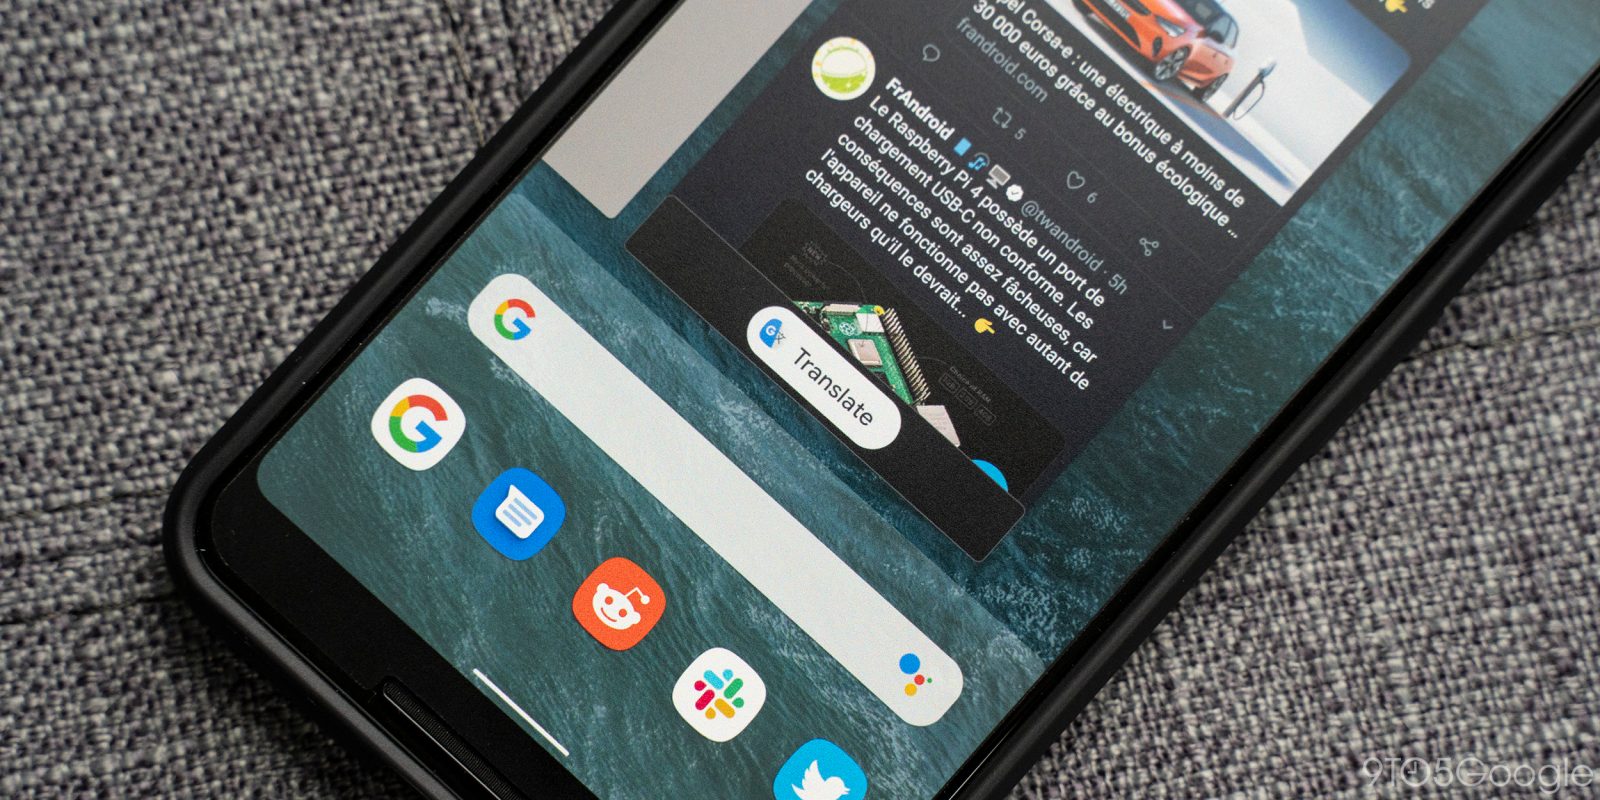 Google Translate Android Q Recent Apps view